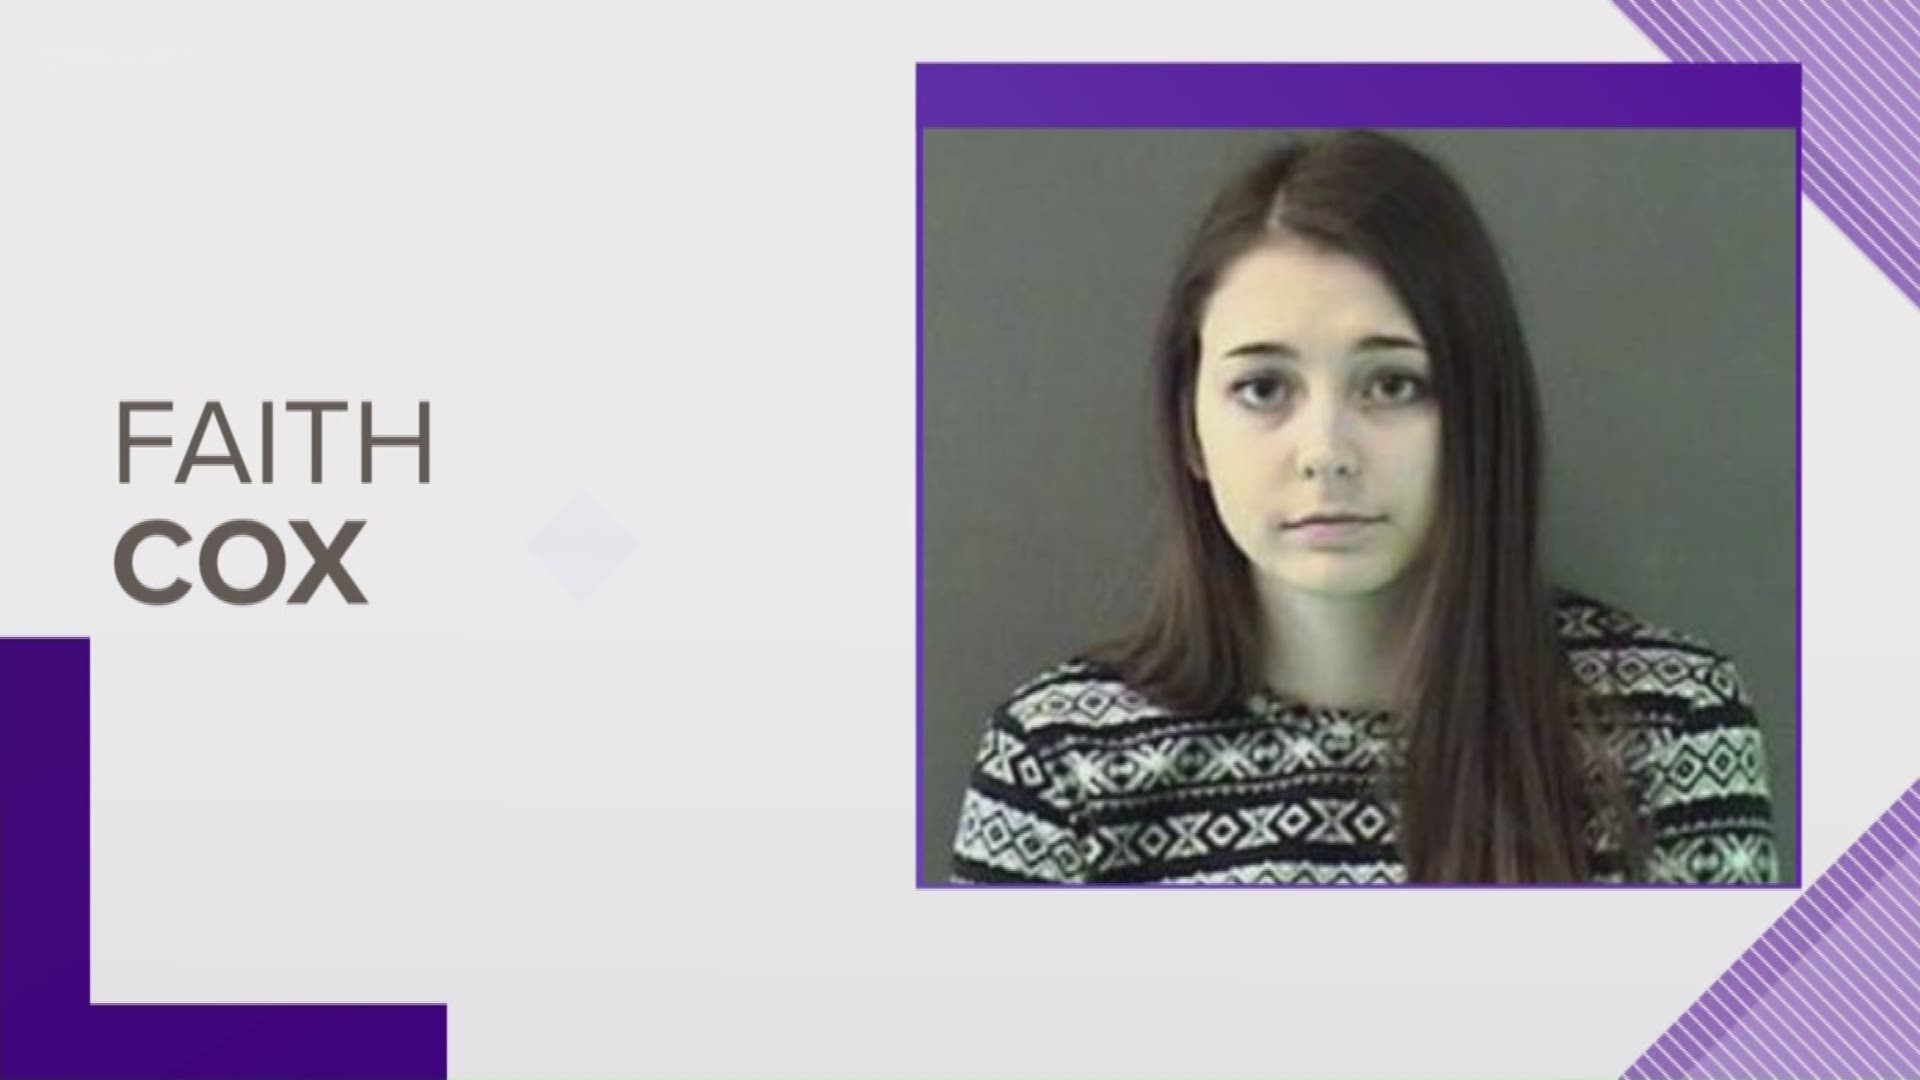 A woman who accused a former boyfriend of breaking into her home and assaulting her has been arrested after authorities say she made the story up.
STORY: http://www.kvue.com/news/local/after-selfie-saves-williamson-county-man-from-prison-ex-girlfriend-arr